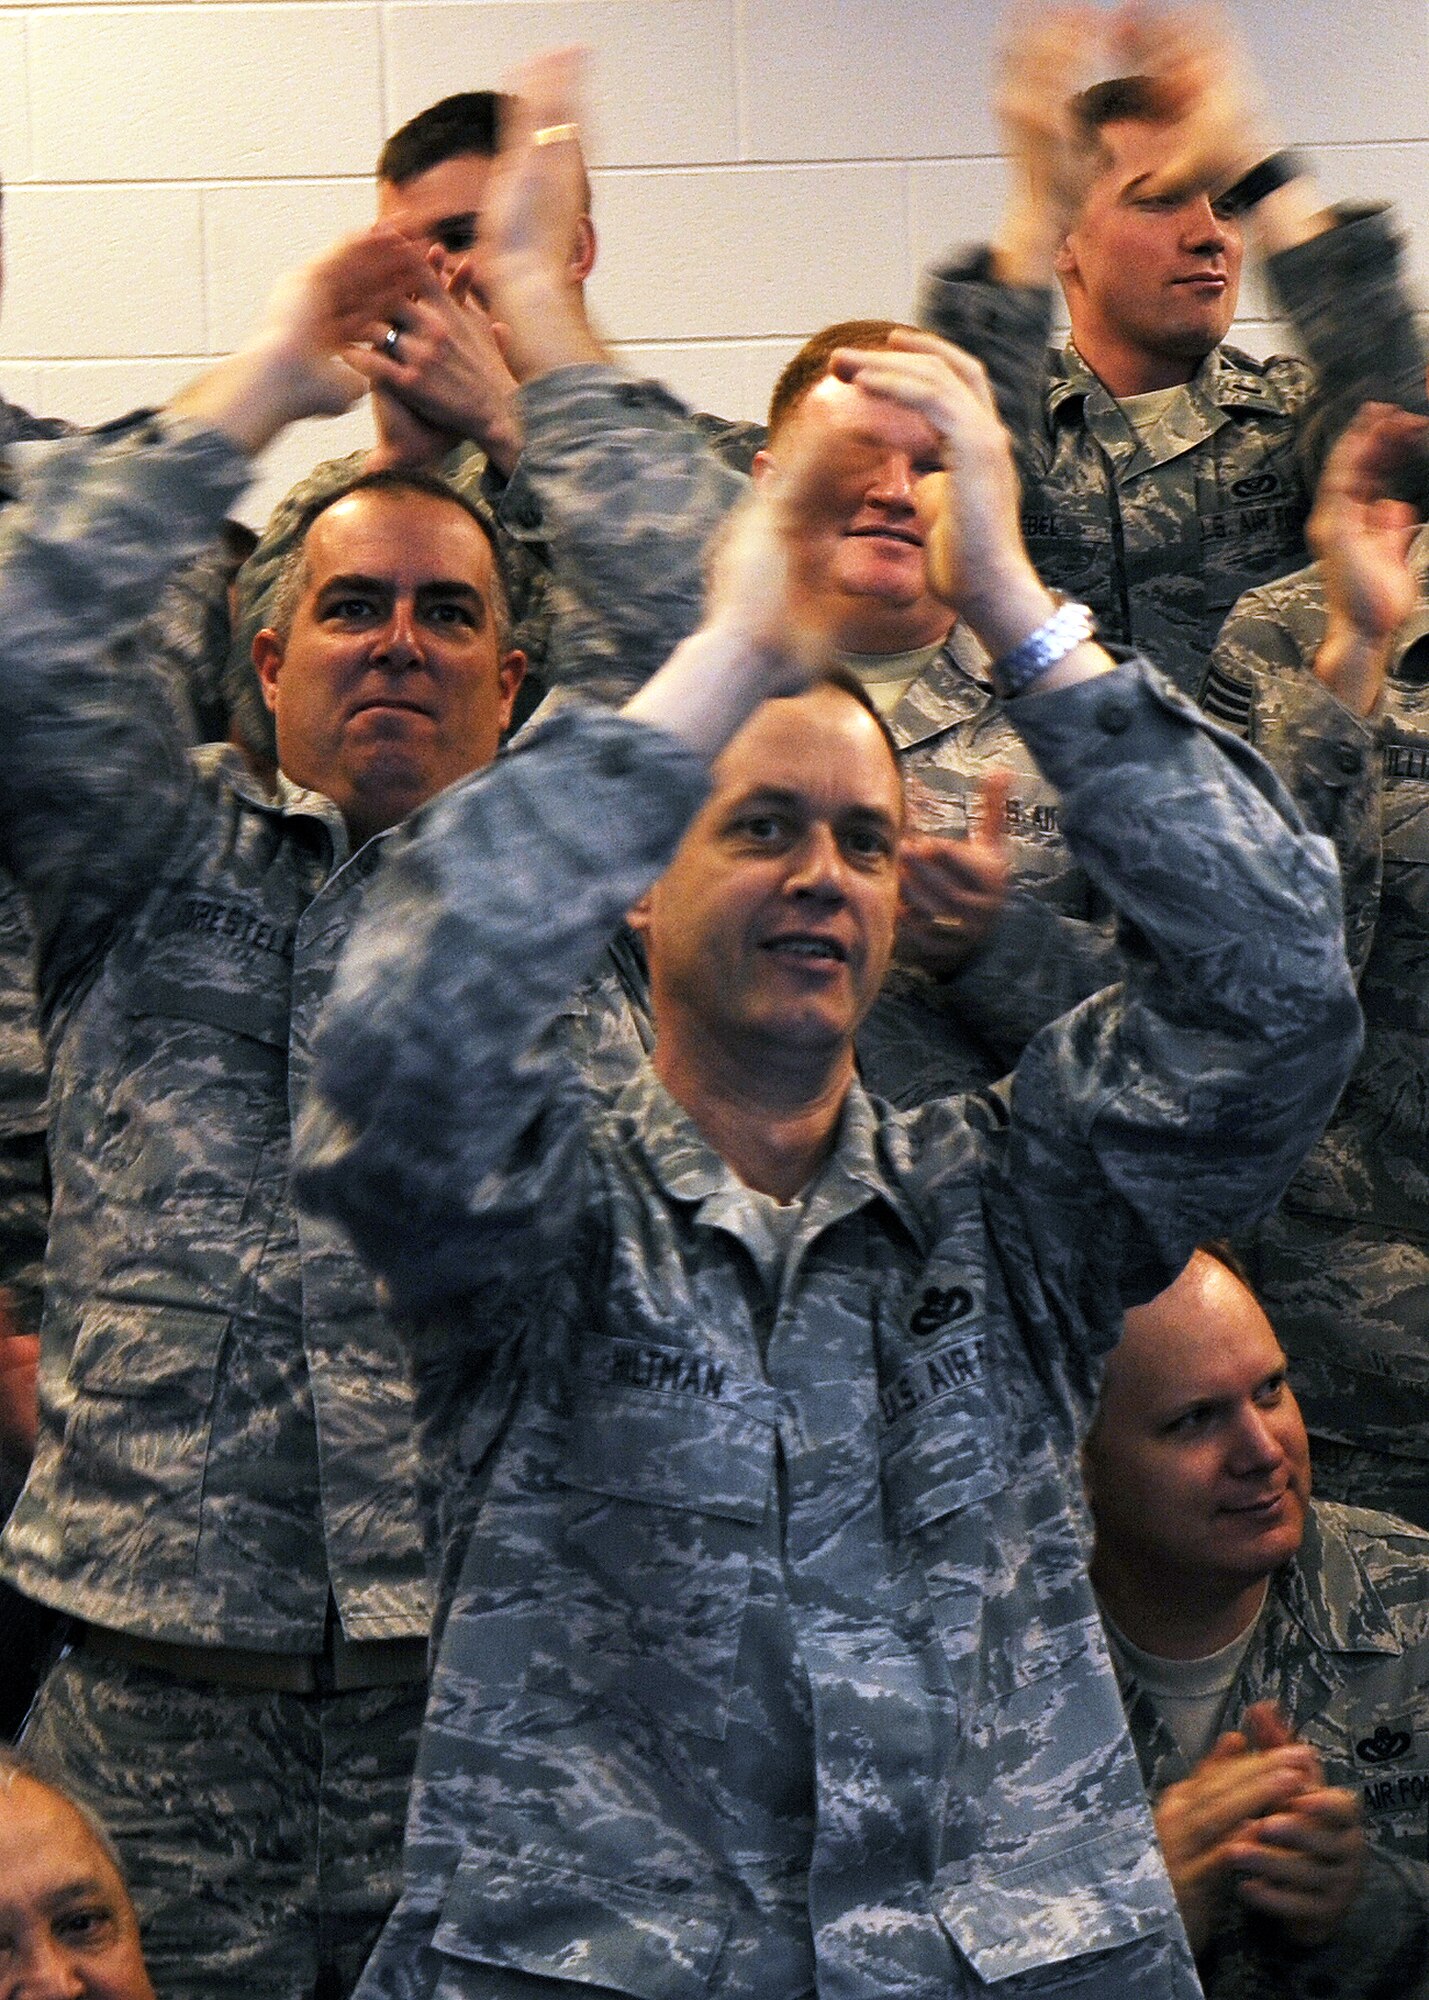 BUCKLEY AIR FORCE BASE, Colo. -- 460th Civil Engineer Squadron Airmen cheer after hearing their performance review during the Operational Readiness / Unit Compliance Inspection outbrief March 10. Team Buckley passed the no-notice ORI/UCI with a satisfactory rating. ( U.S. Air Force Photo by Airman 1st Class Marcy Glass )

